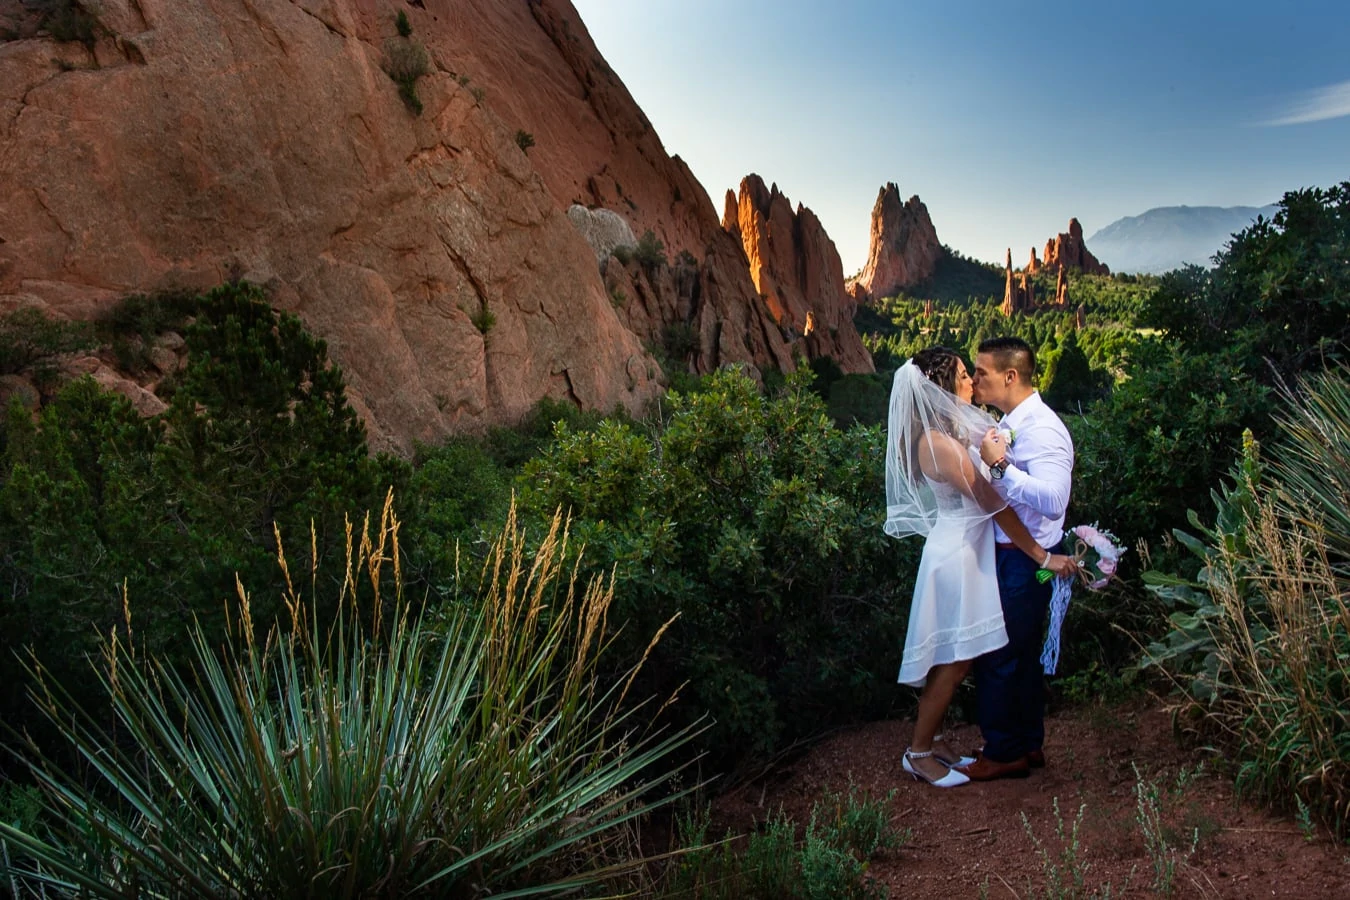 The elopement couple shares a smooch overlooking Garden of the Gods park at sunrise.